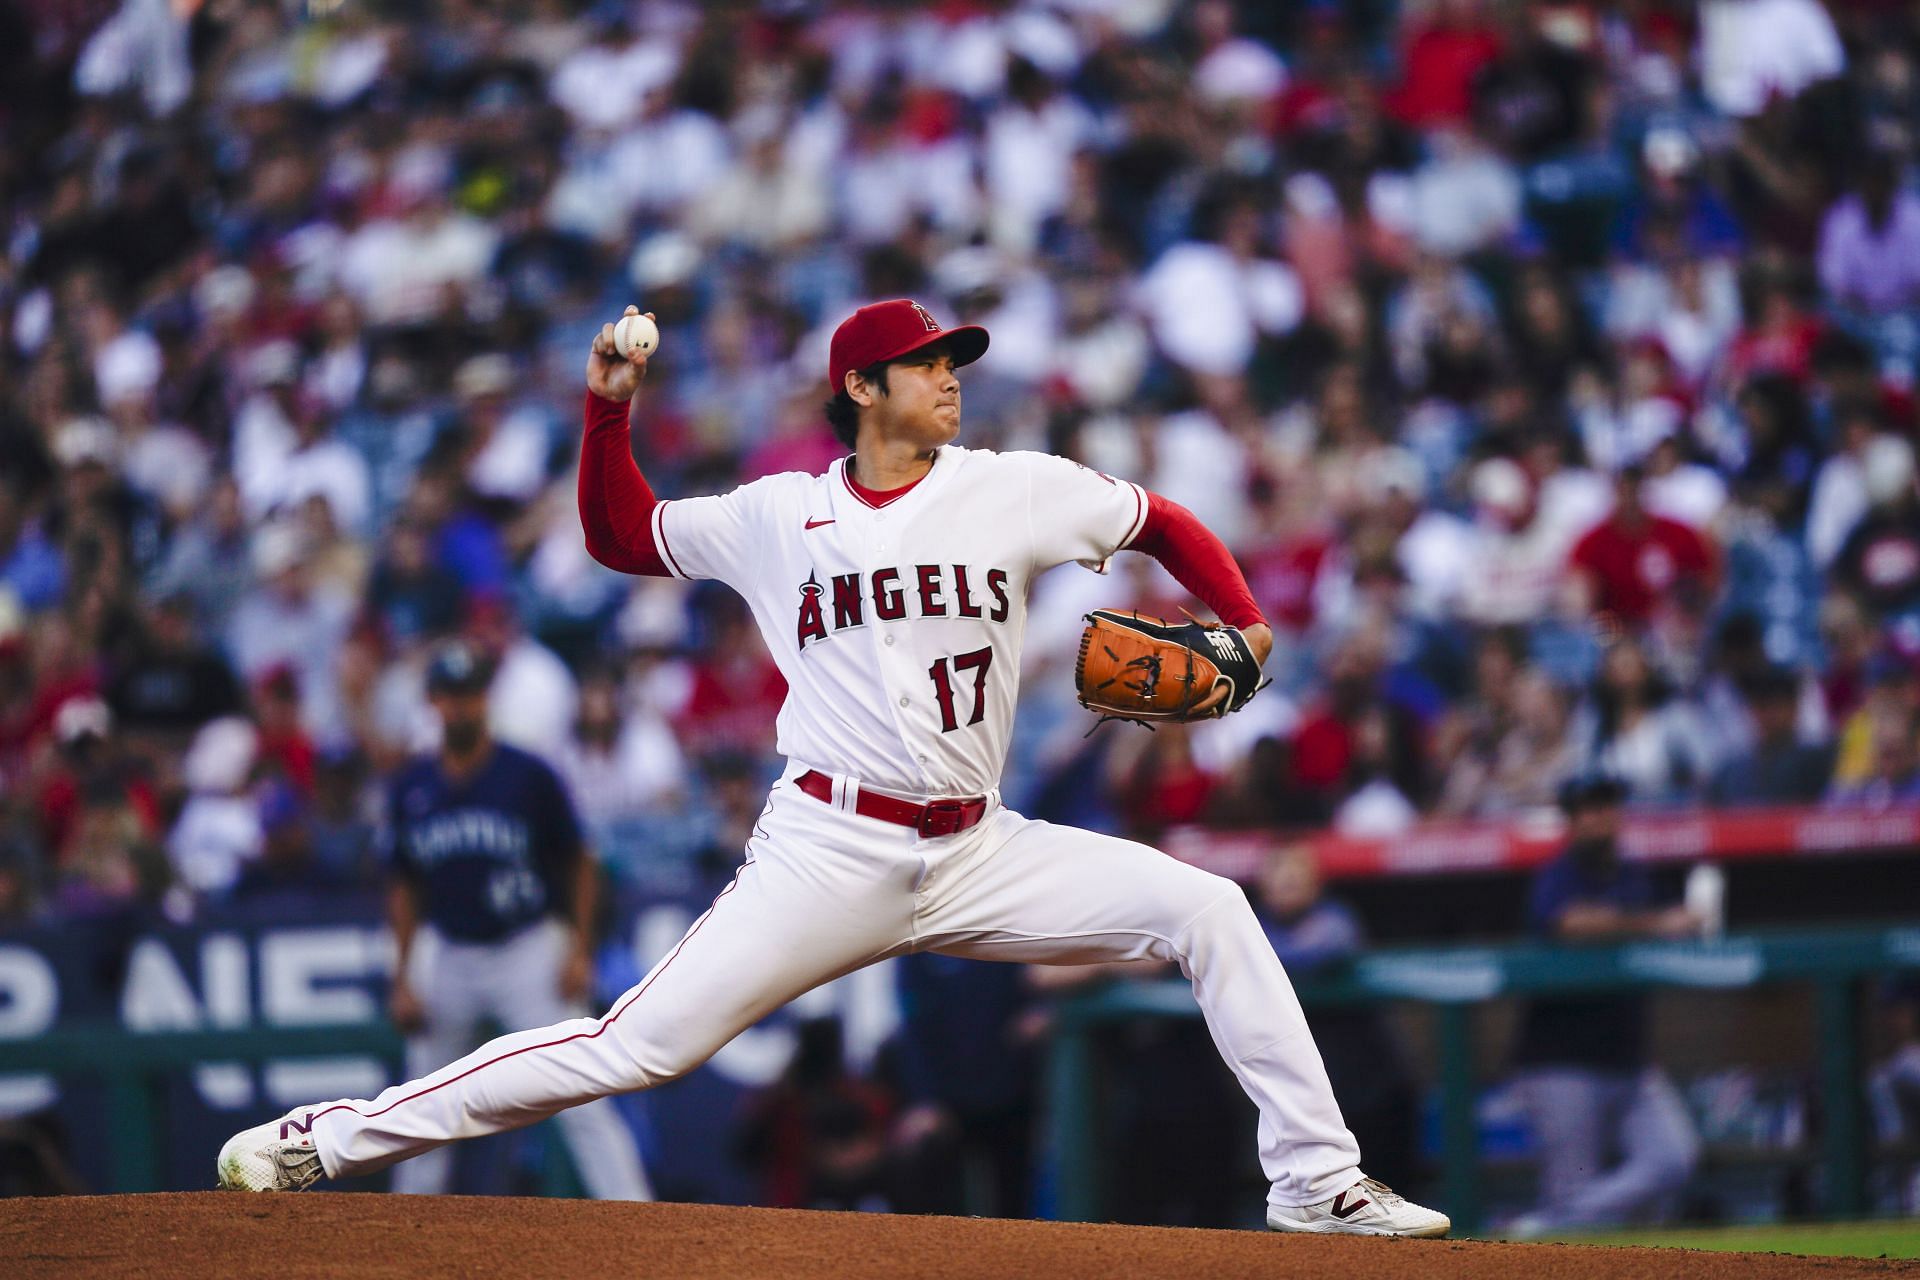 Los Angeles Angels starting pitcher Shohei Ohtani delivers a pitch against the Seattle Mariners in Anaheim